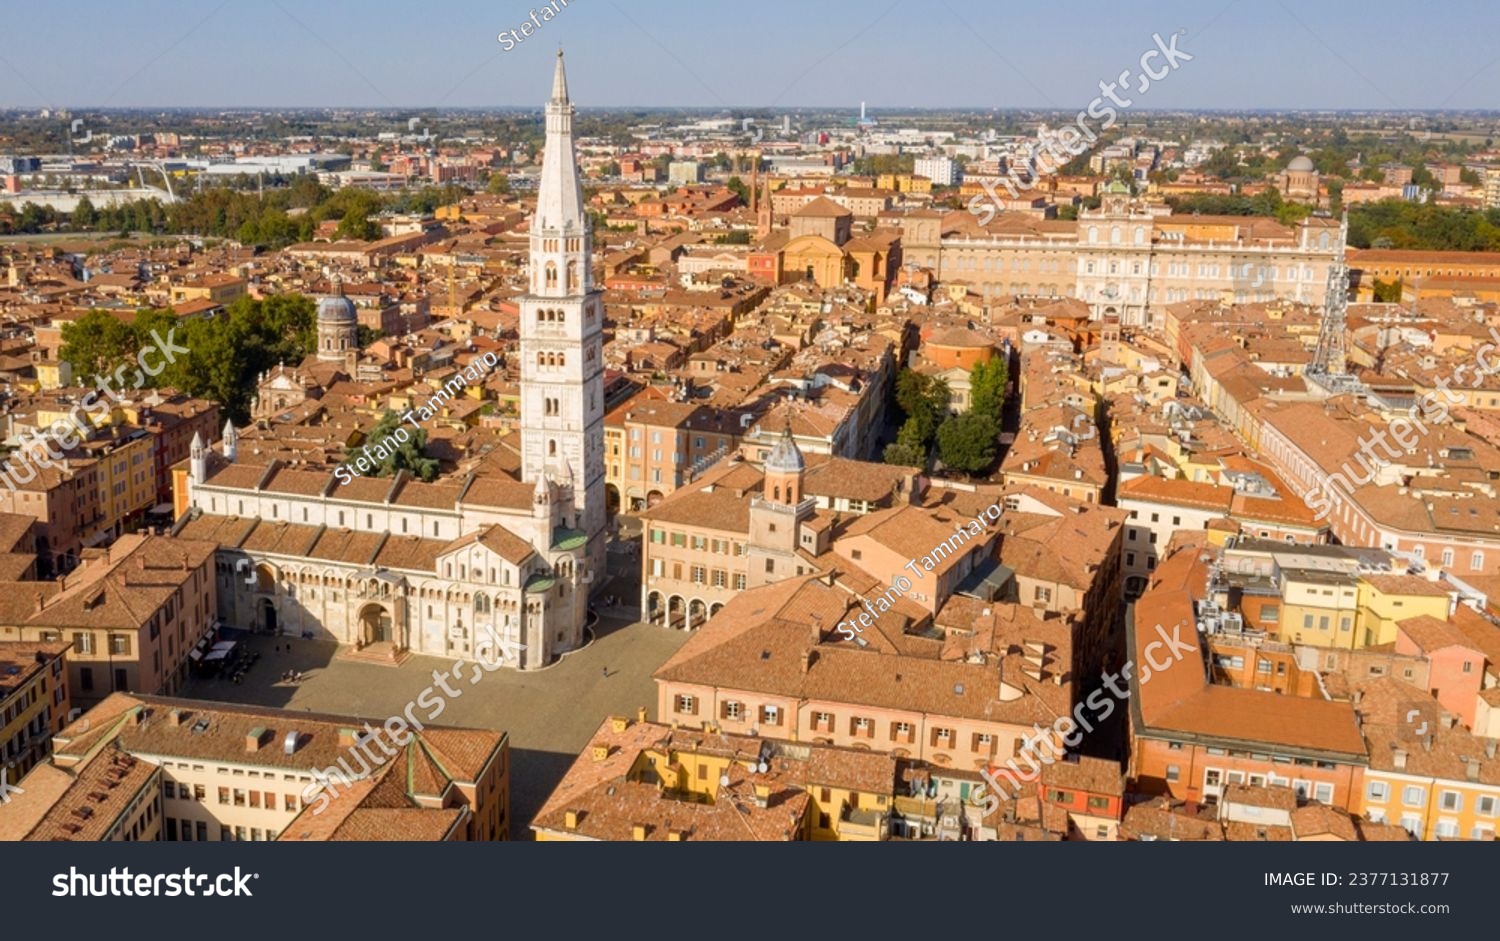 Aerial view of the Modena Cathedral and Torre della Ghirlandina, the bell tower of this Roman Catholic church. In background there is the Ducal Palace of Modena, Emilia Romagna, Italy. #2377131877